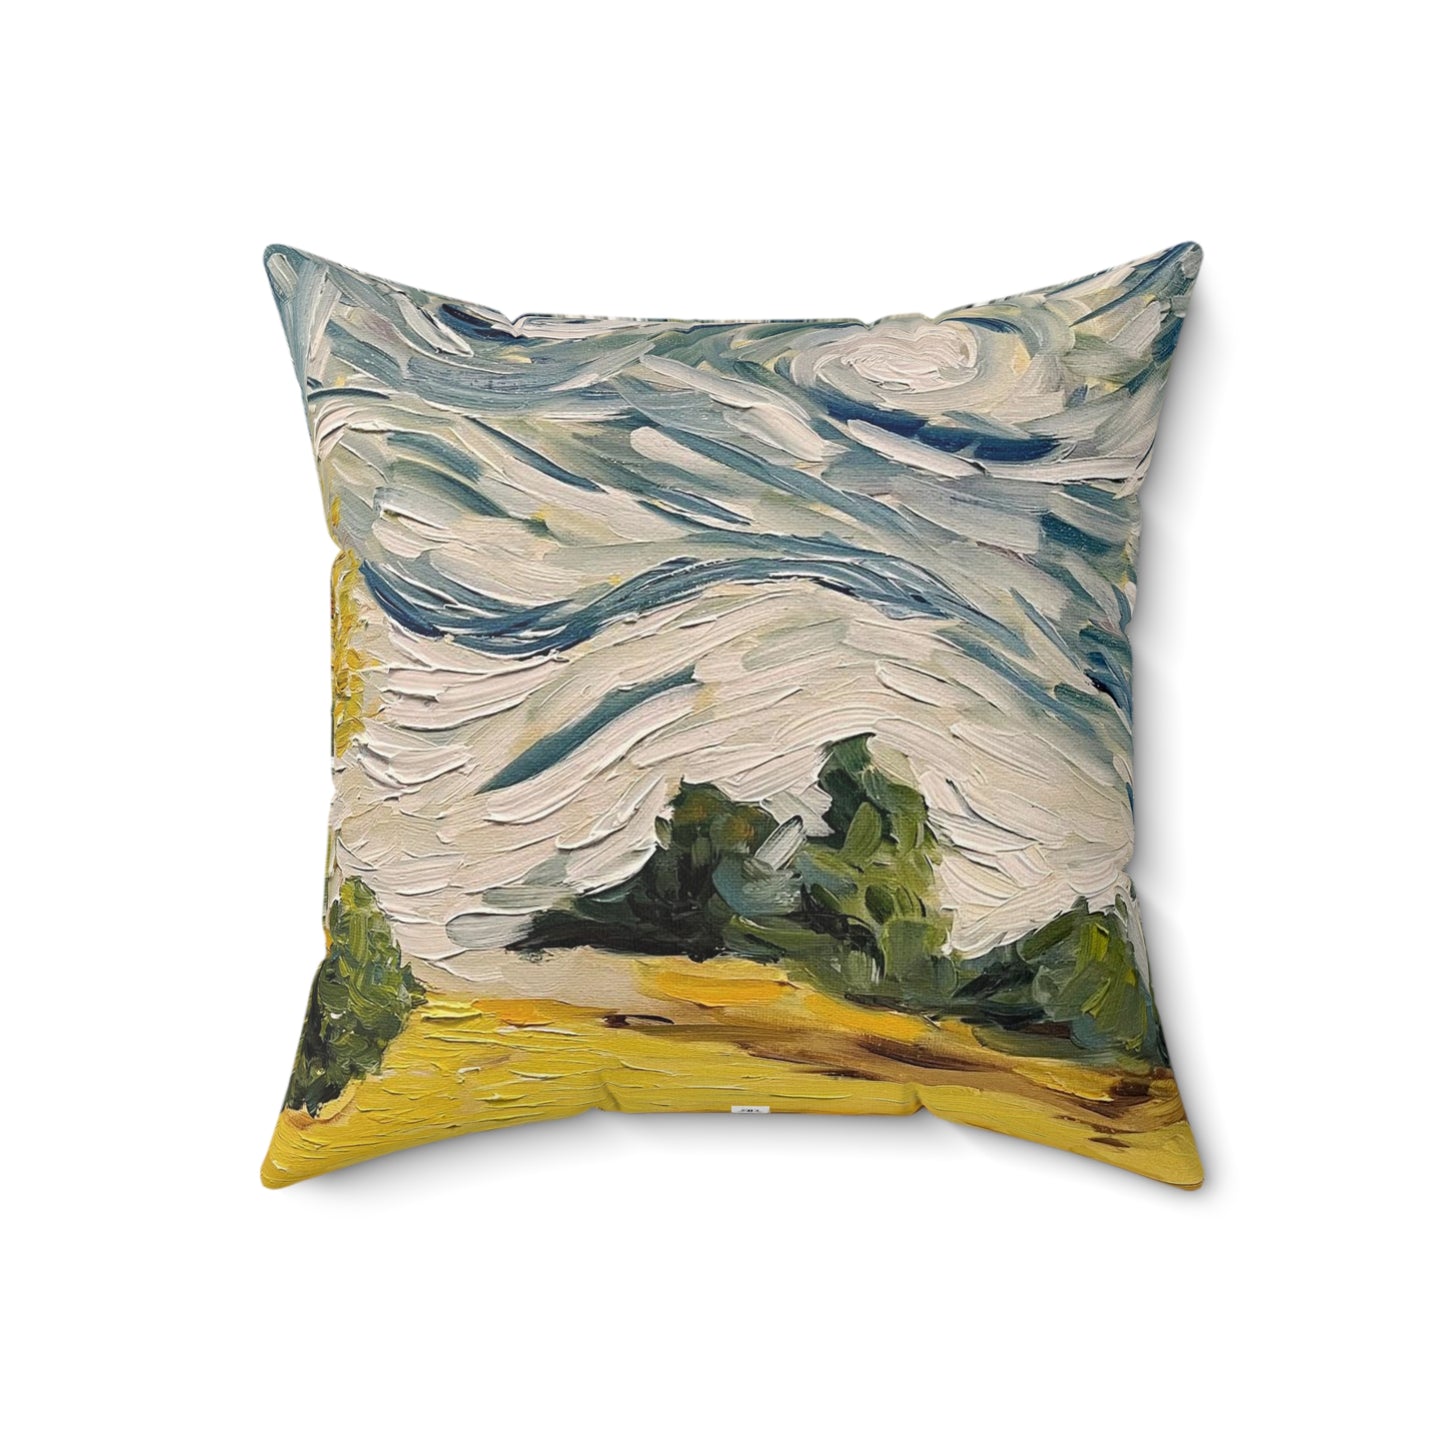 Sunny Day Indoor Spun Polyester Square Pillow